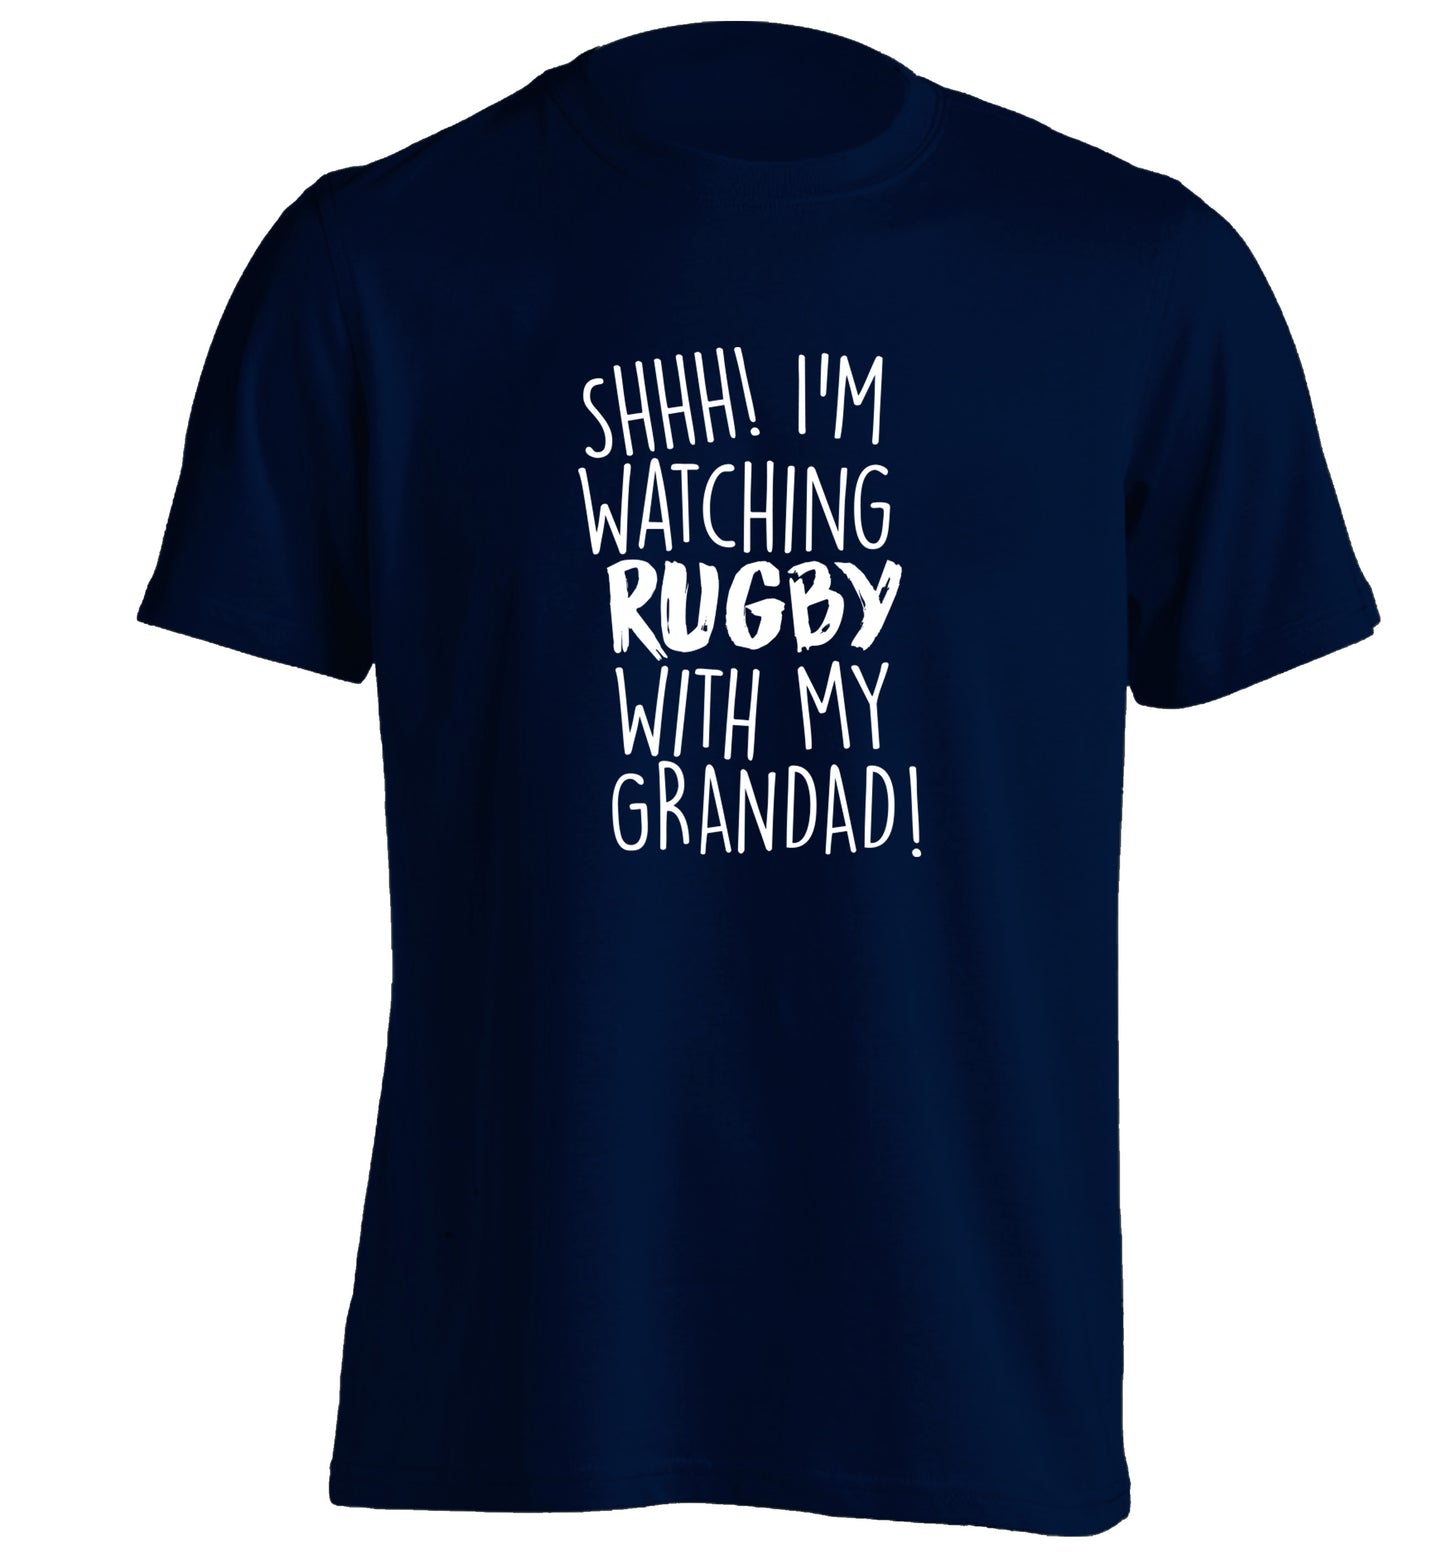 Shh I'm watching rugby with my grandaughter adults unisex navy Tshirt 2XL